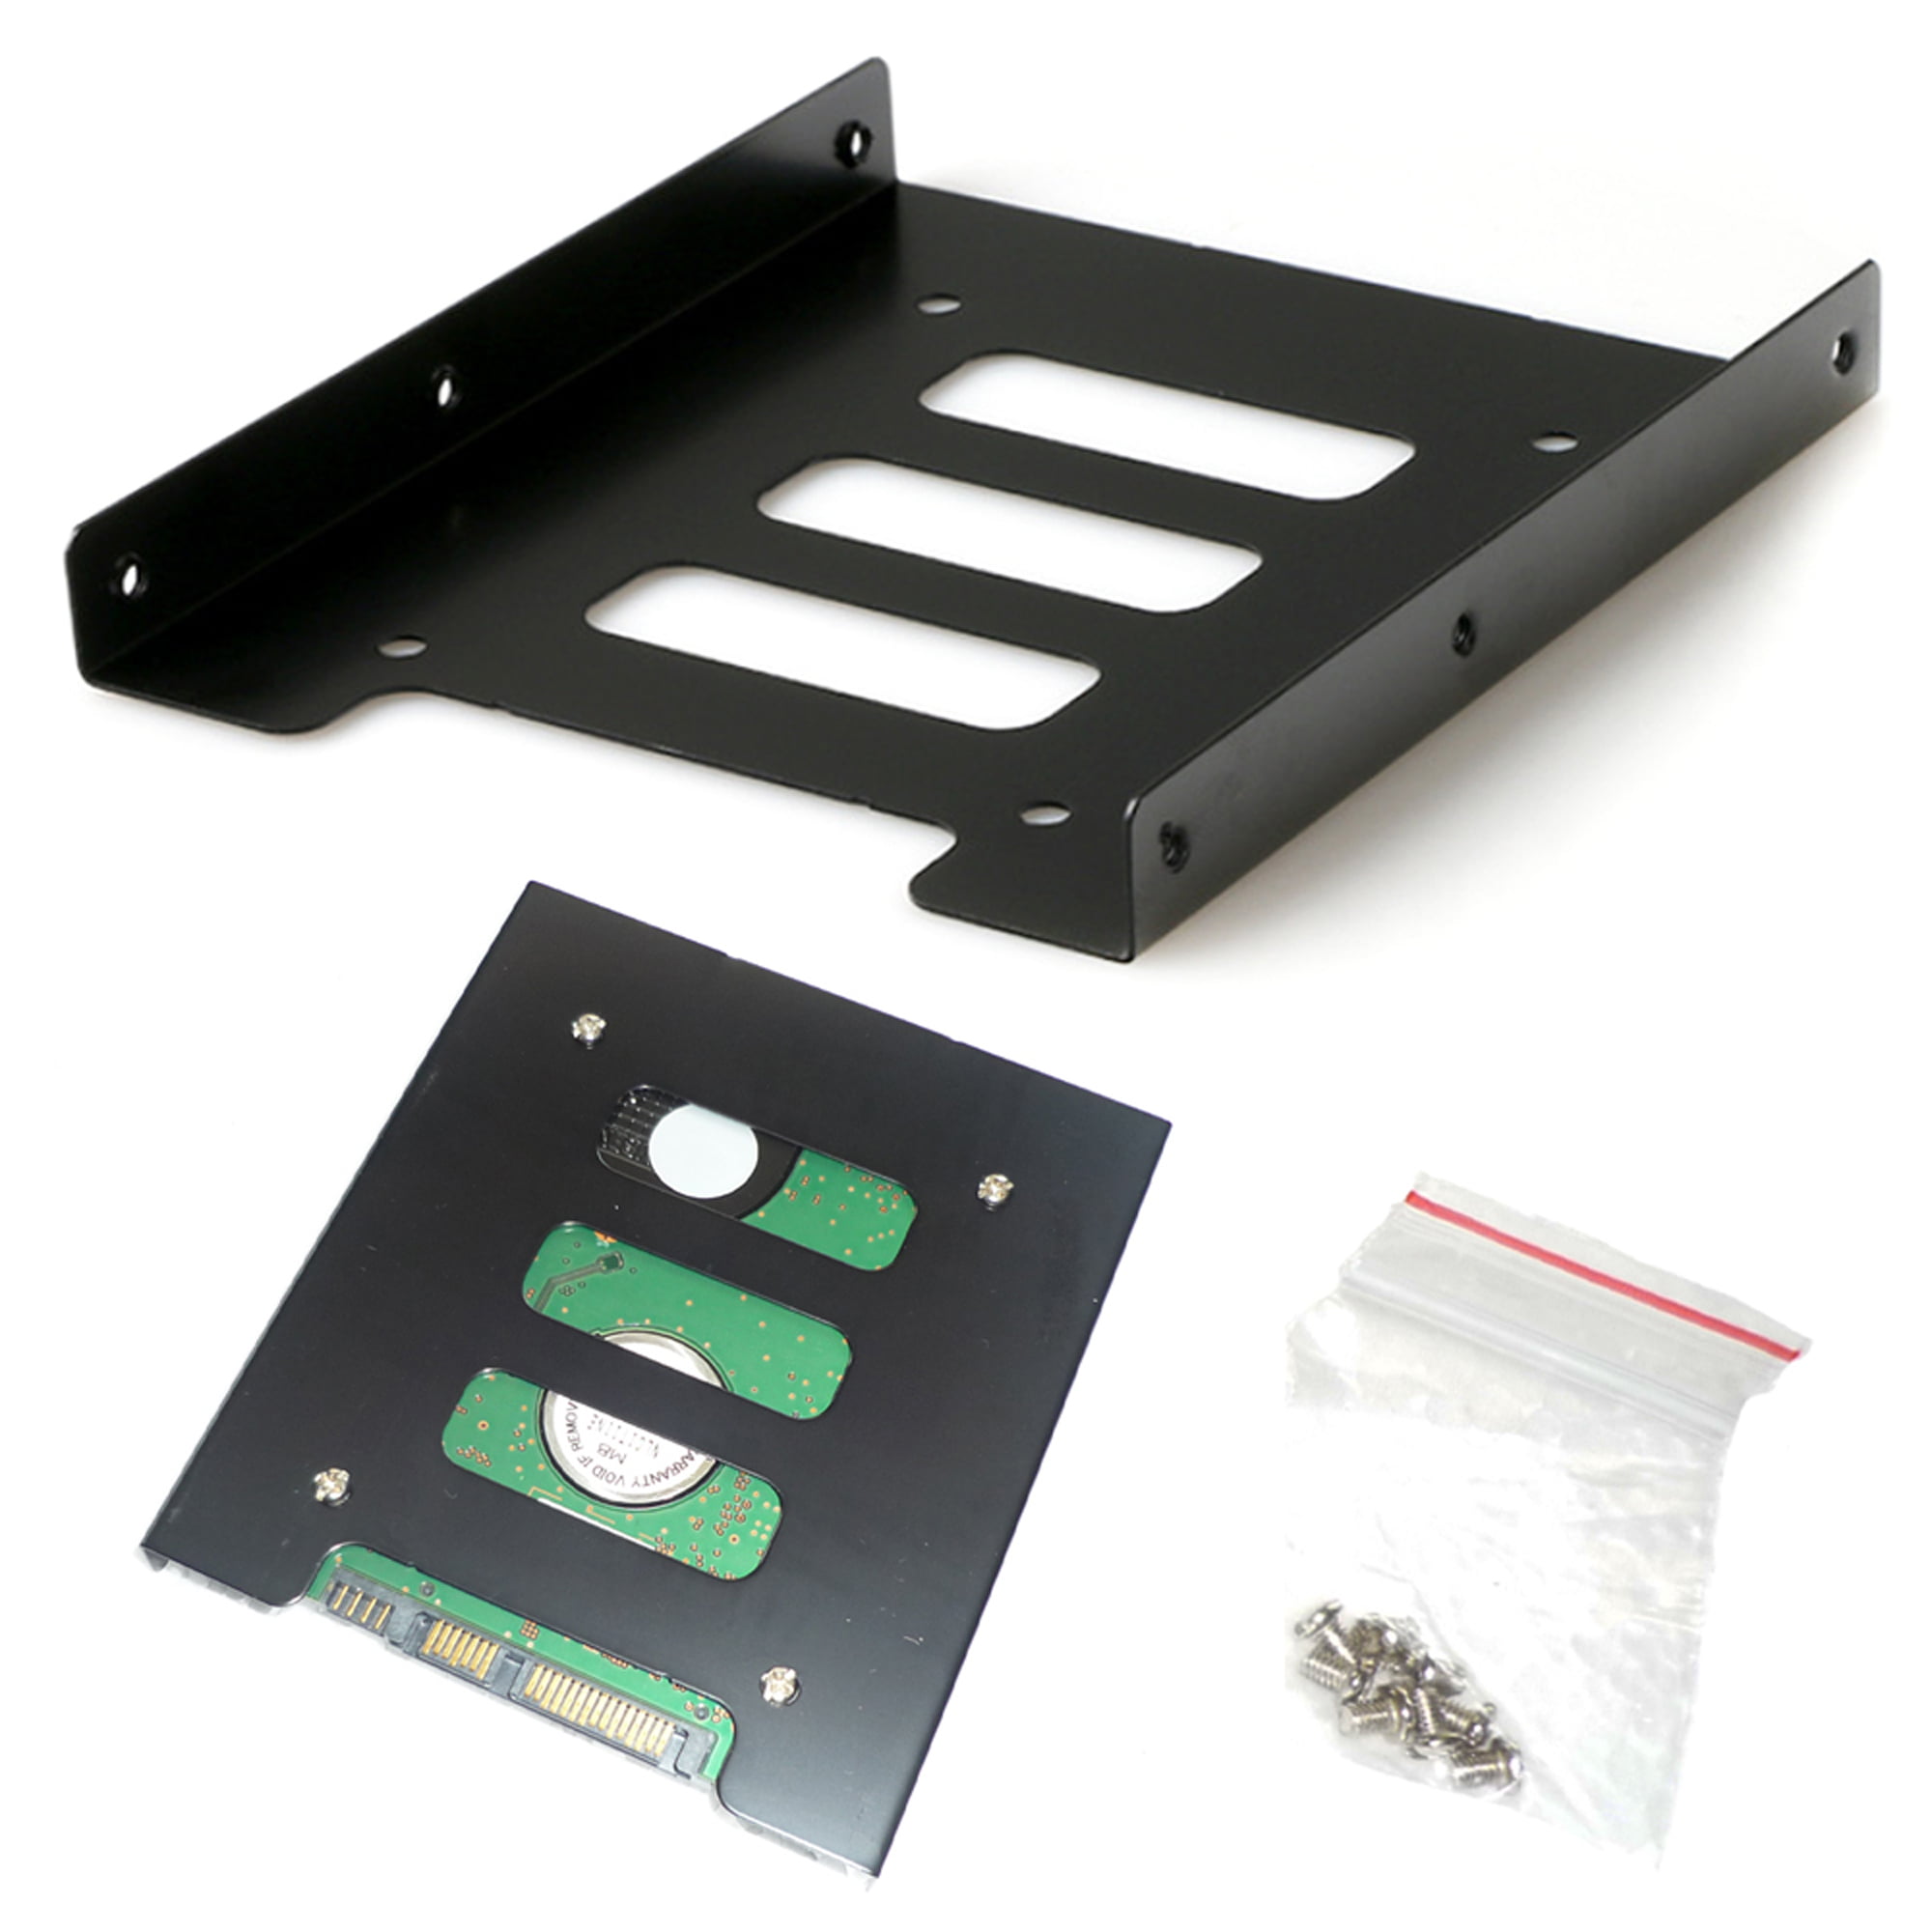 2.5" SSD HDD Adapter Mounting Tray Bracket Plastic Caddy for 3.5" PC Case Bay 